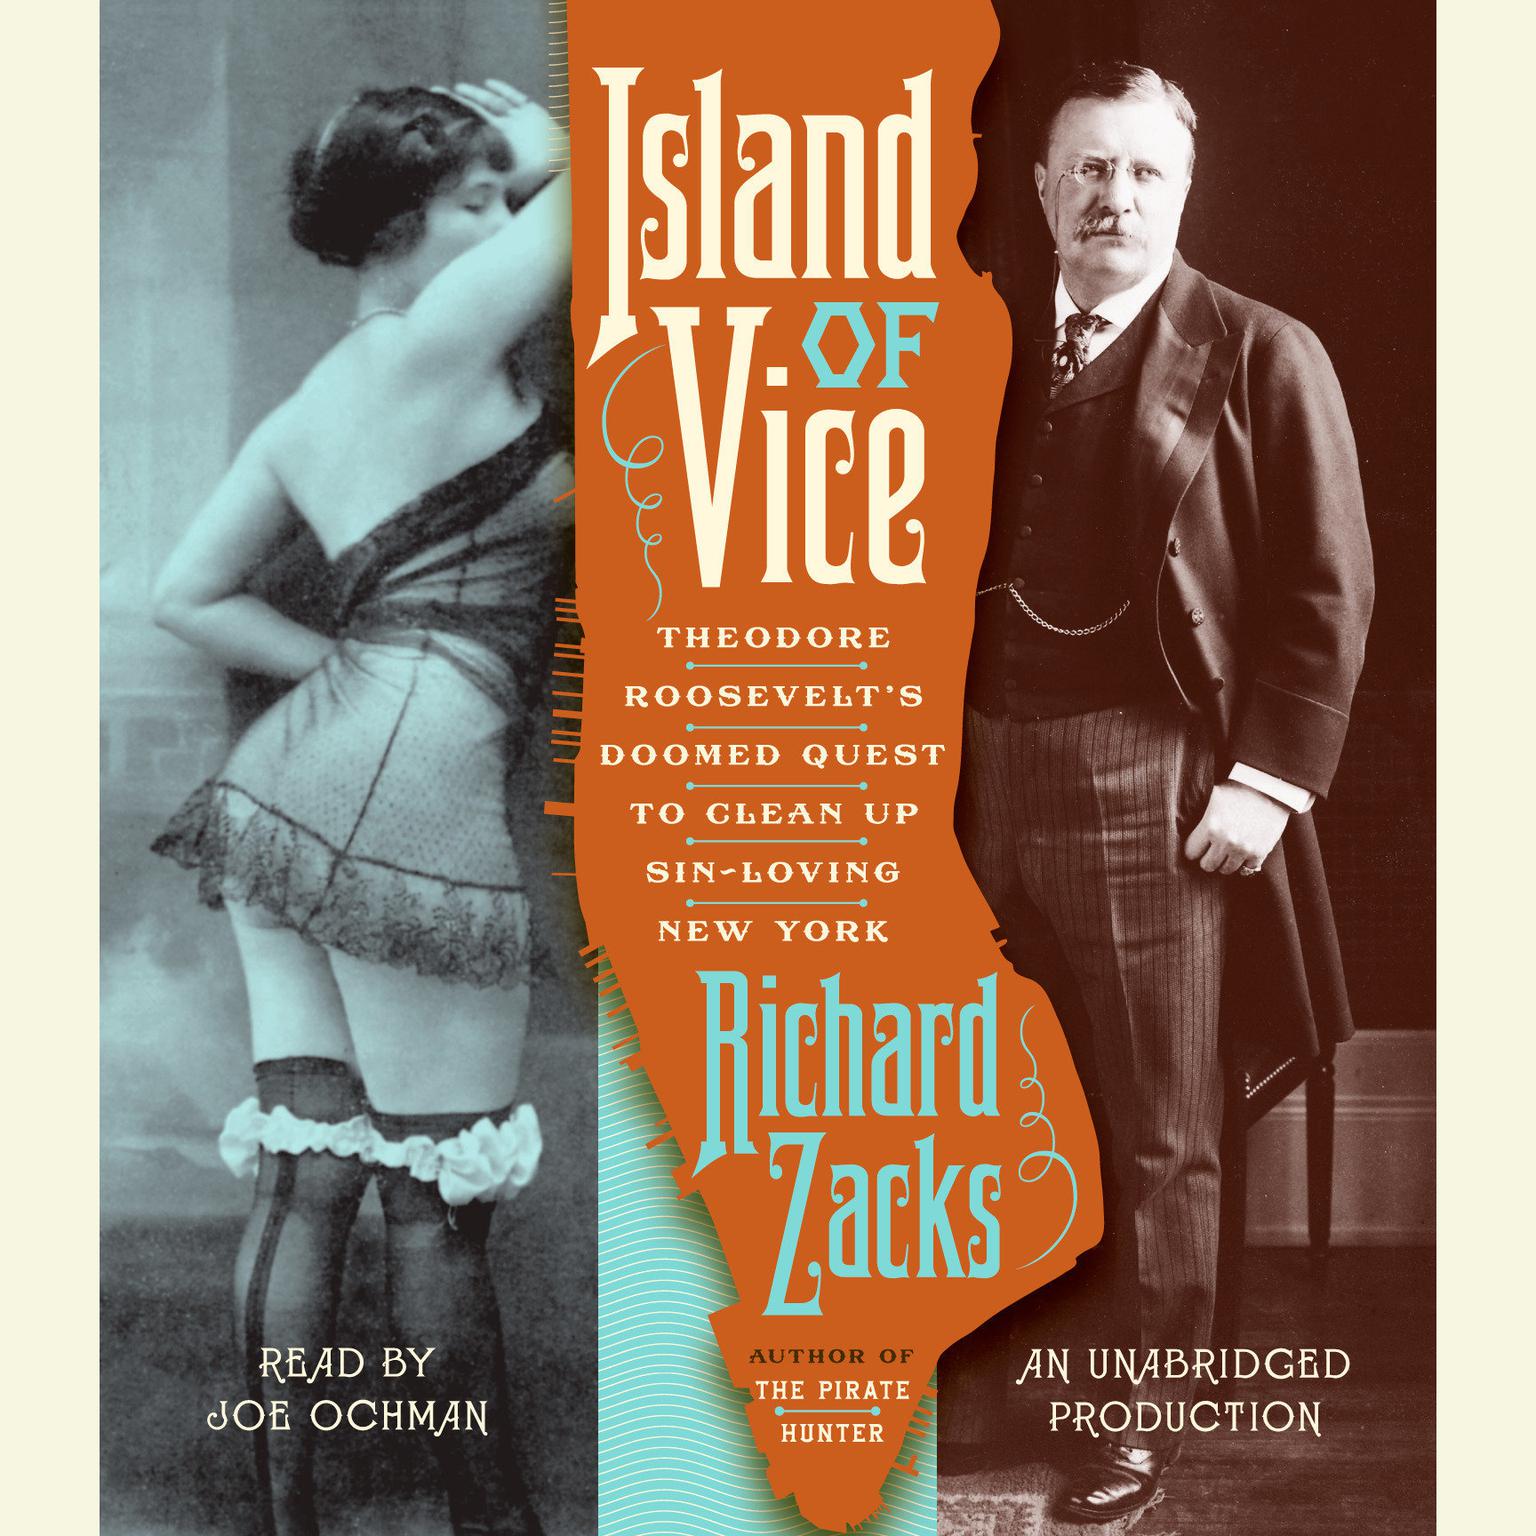 Island of Vice: Theodore Roosevelts Doomed Quest to Clean up Sin-Loving New York Audiobook, by Richard Zacks